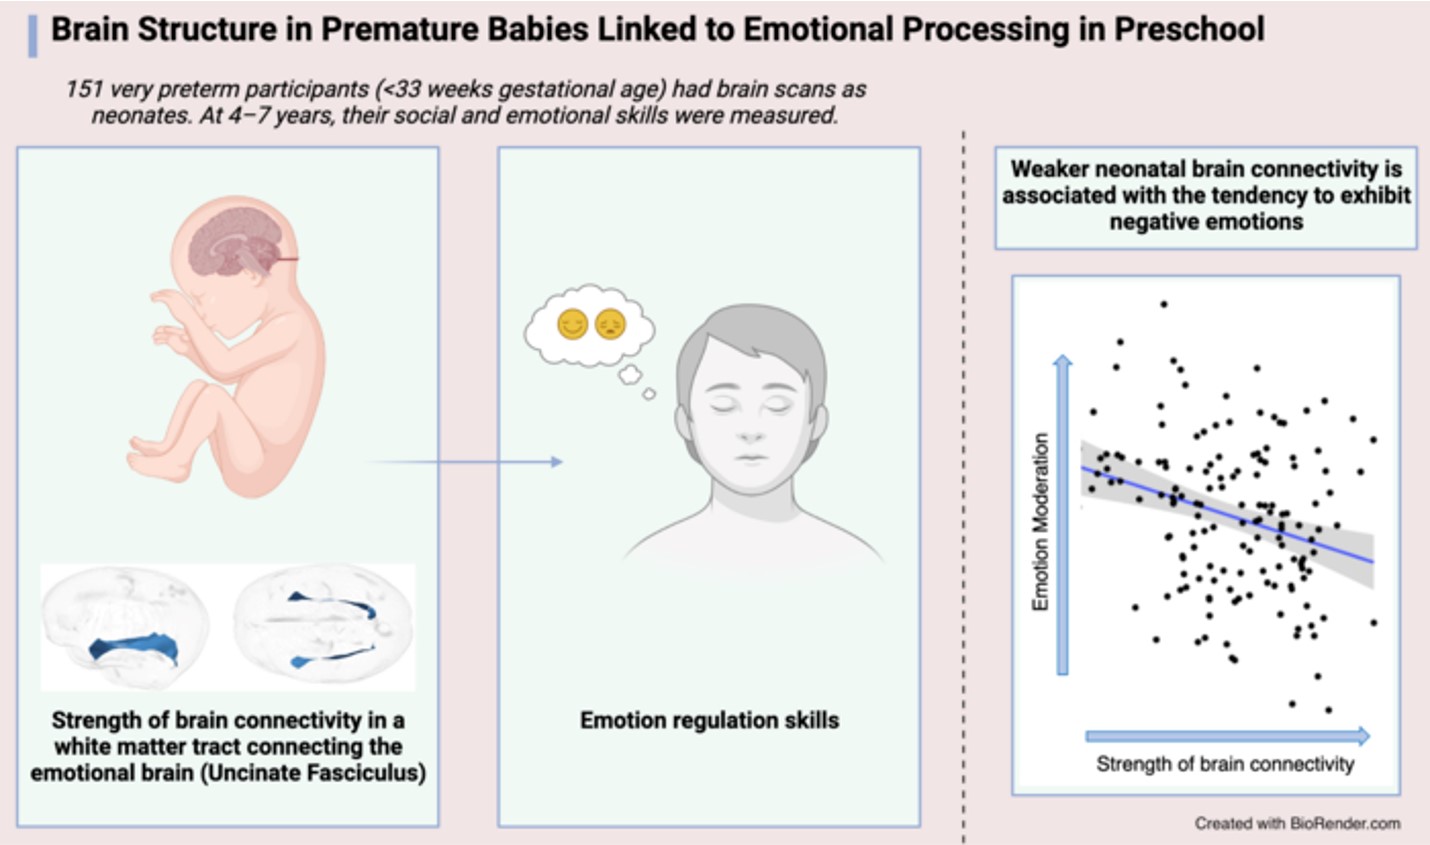 Brain structure in premature babies linked to emotional processing in preschool